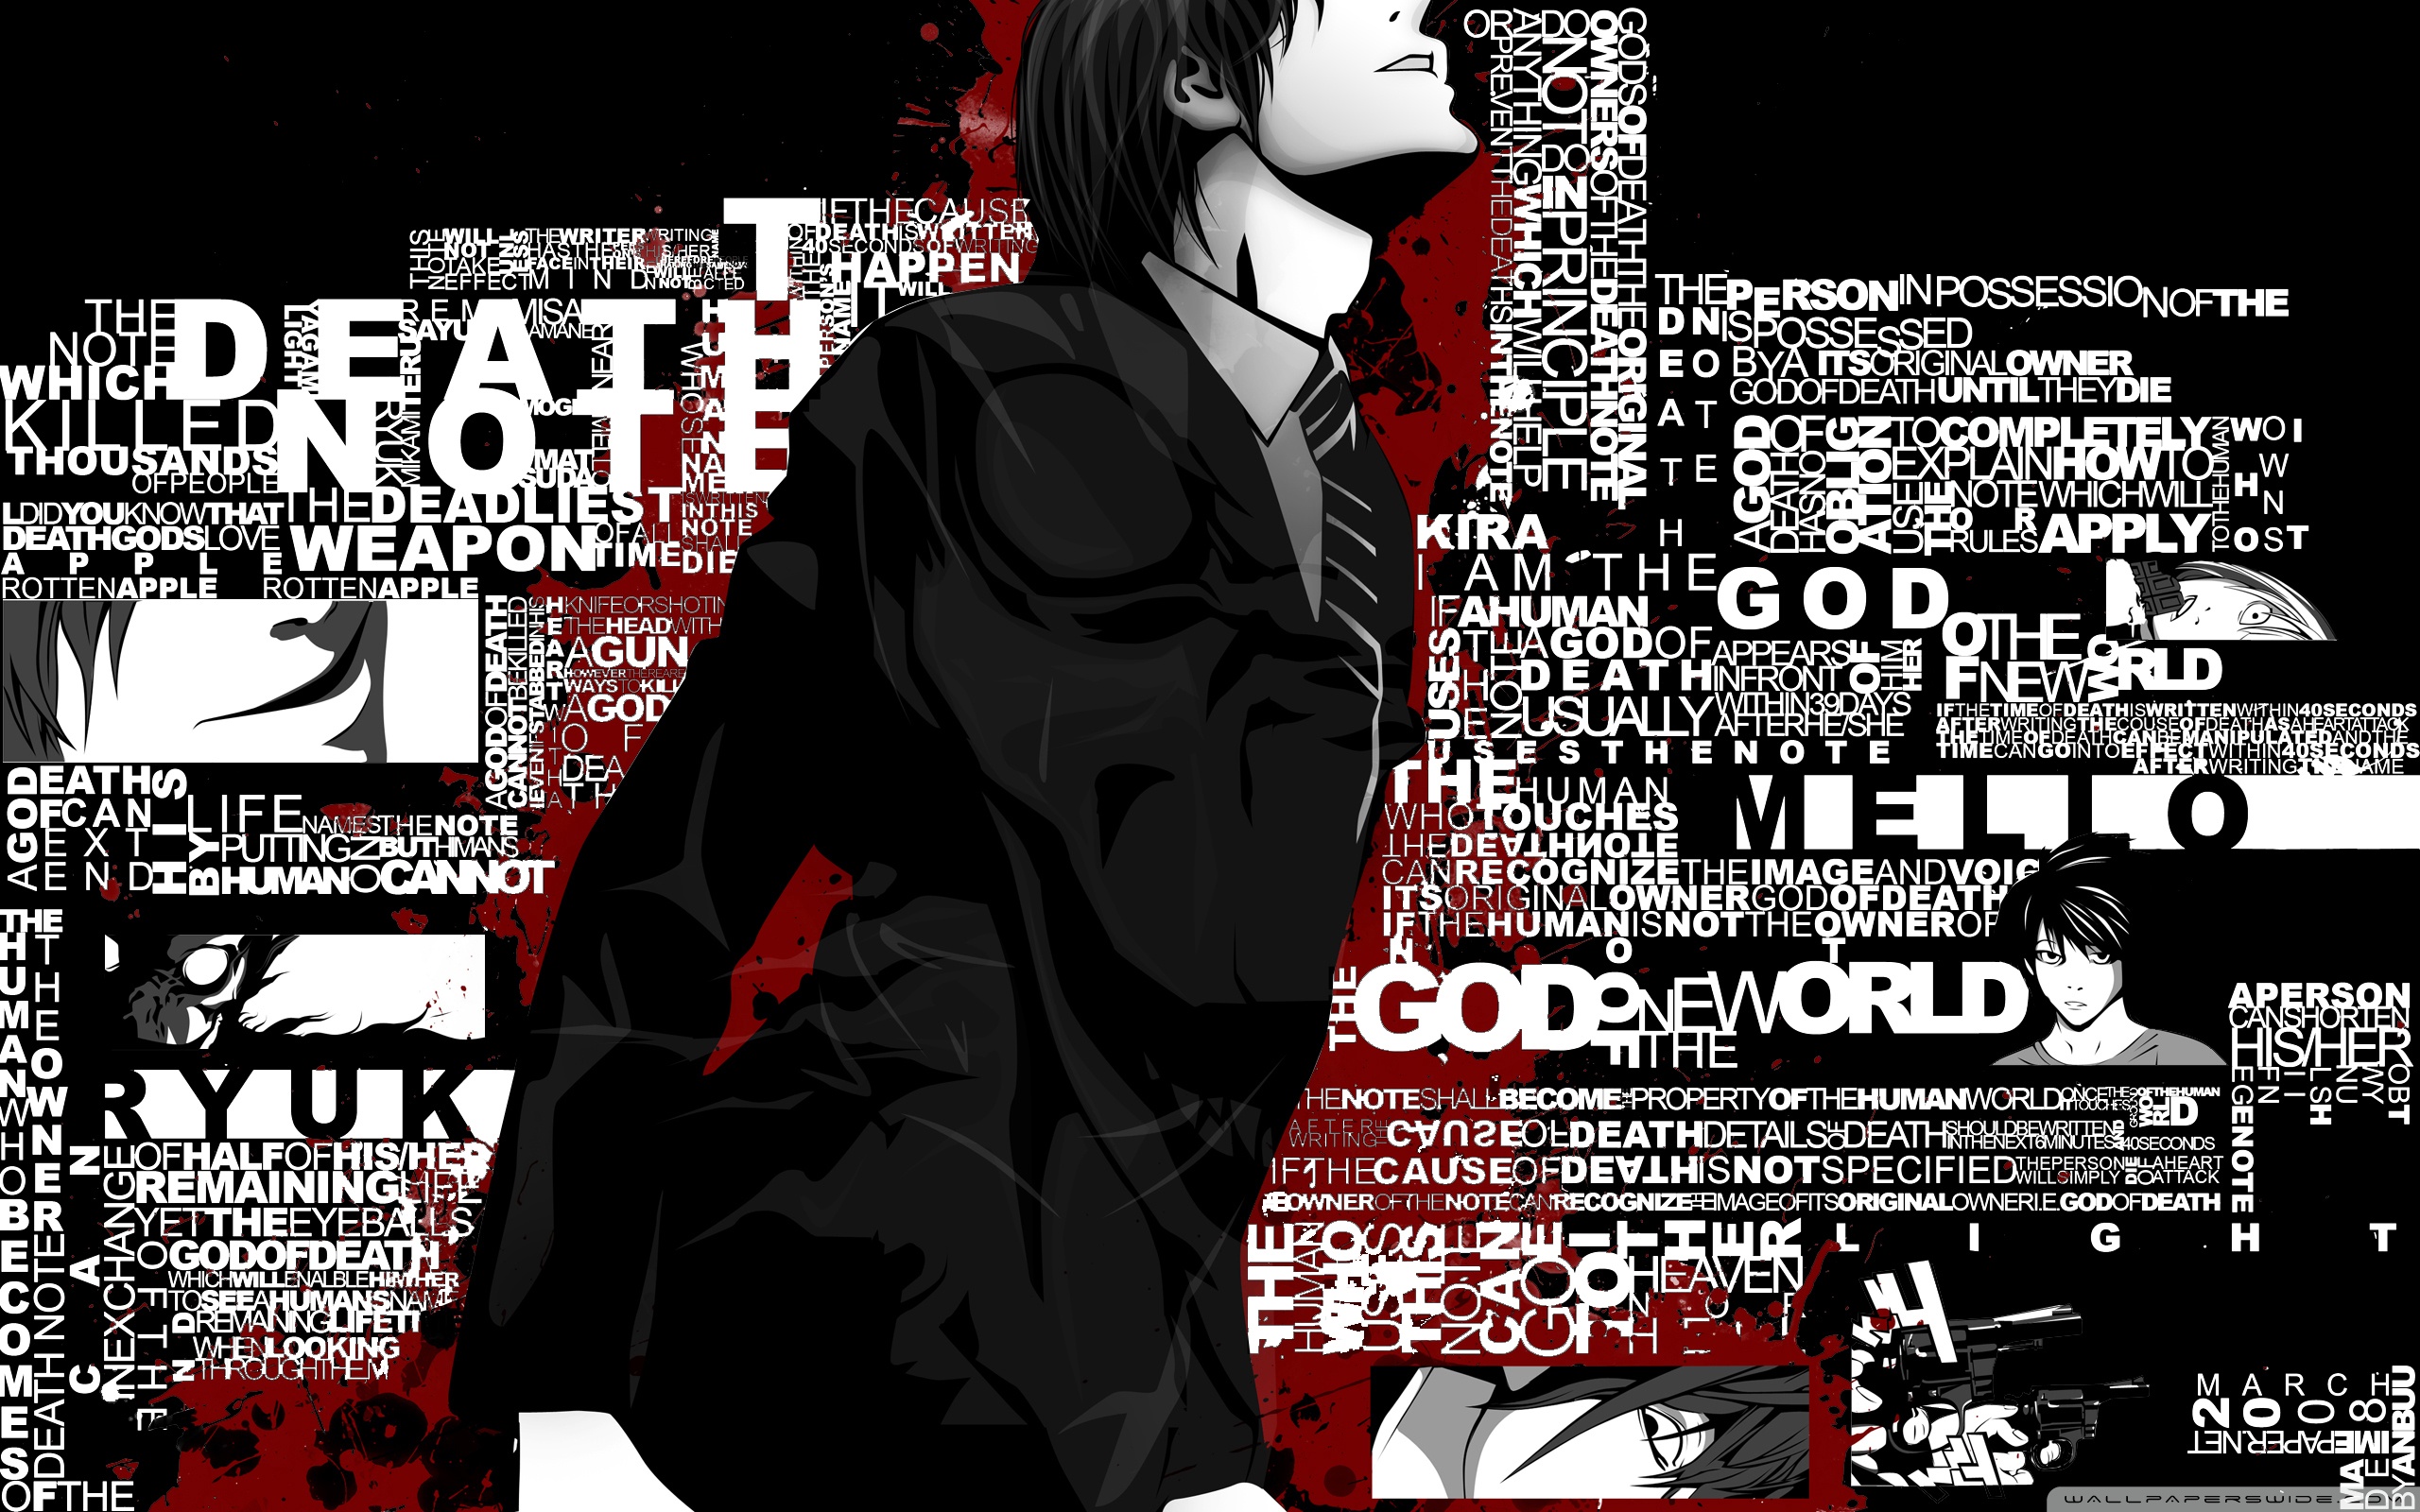 Kira with Deathnote book Wallpaper Download